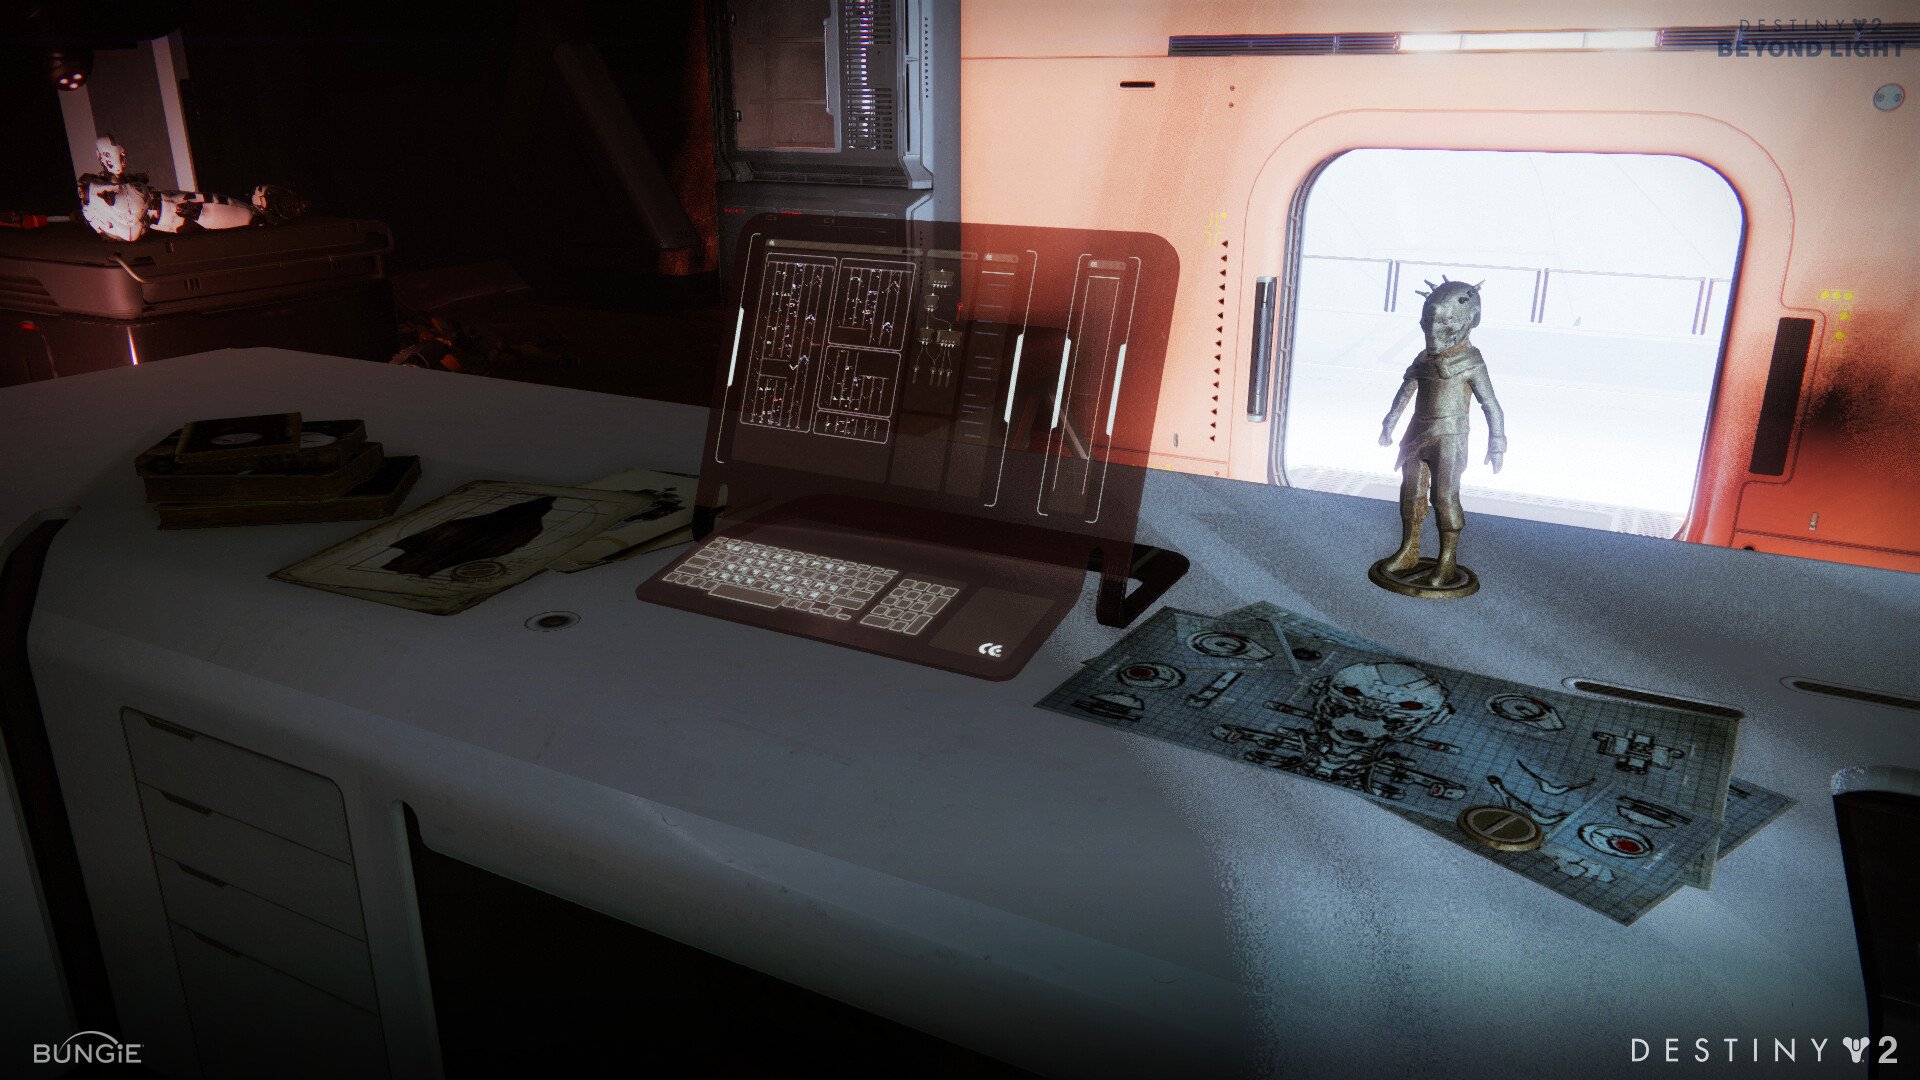 Model of Clovis-1 and drawings of Clarity on Clovis' desk.